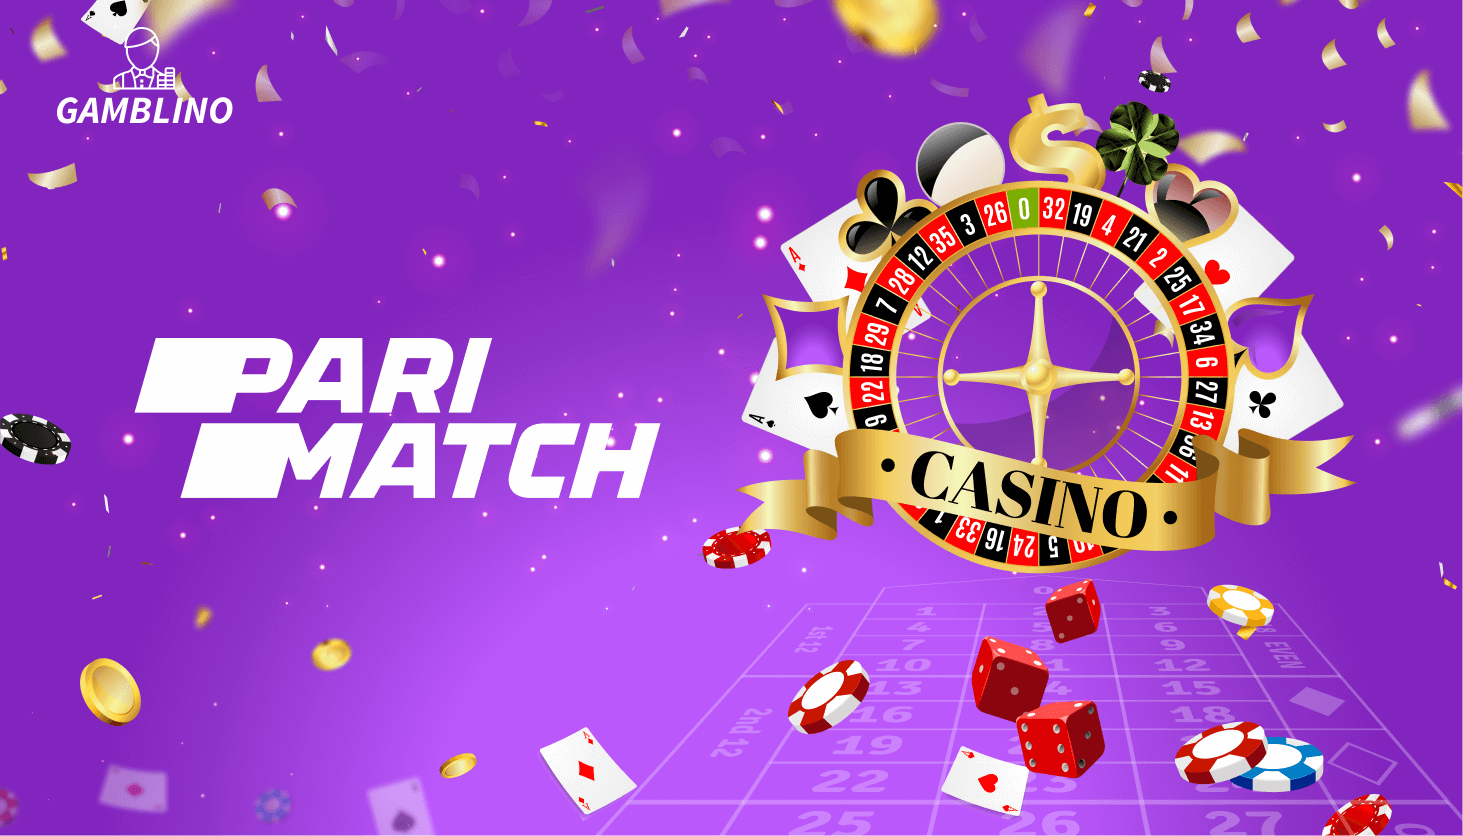 parimatch online casino review by gamblino